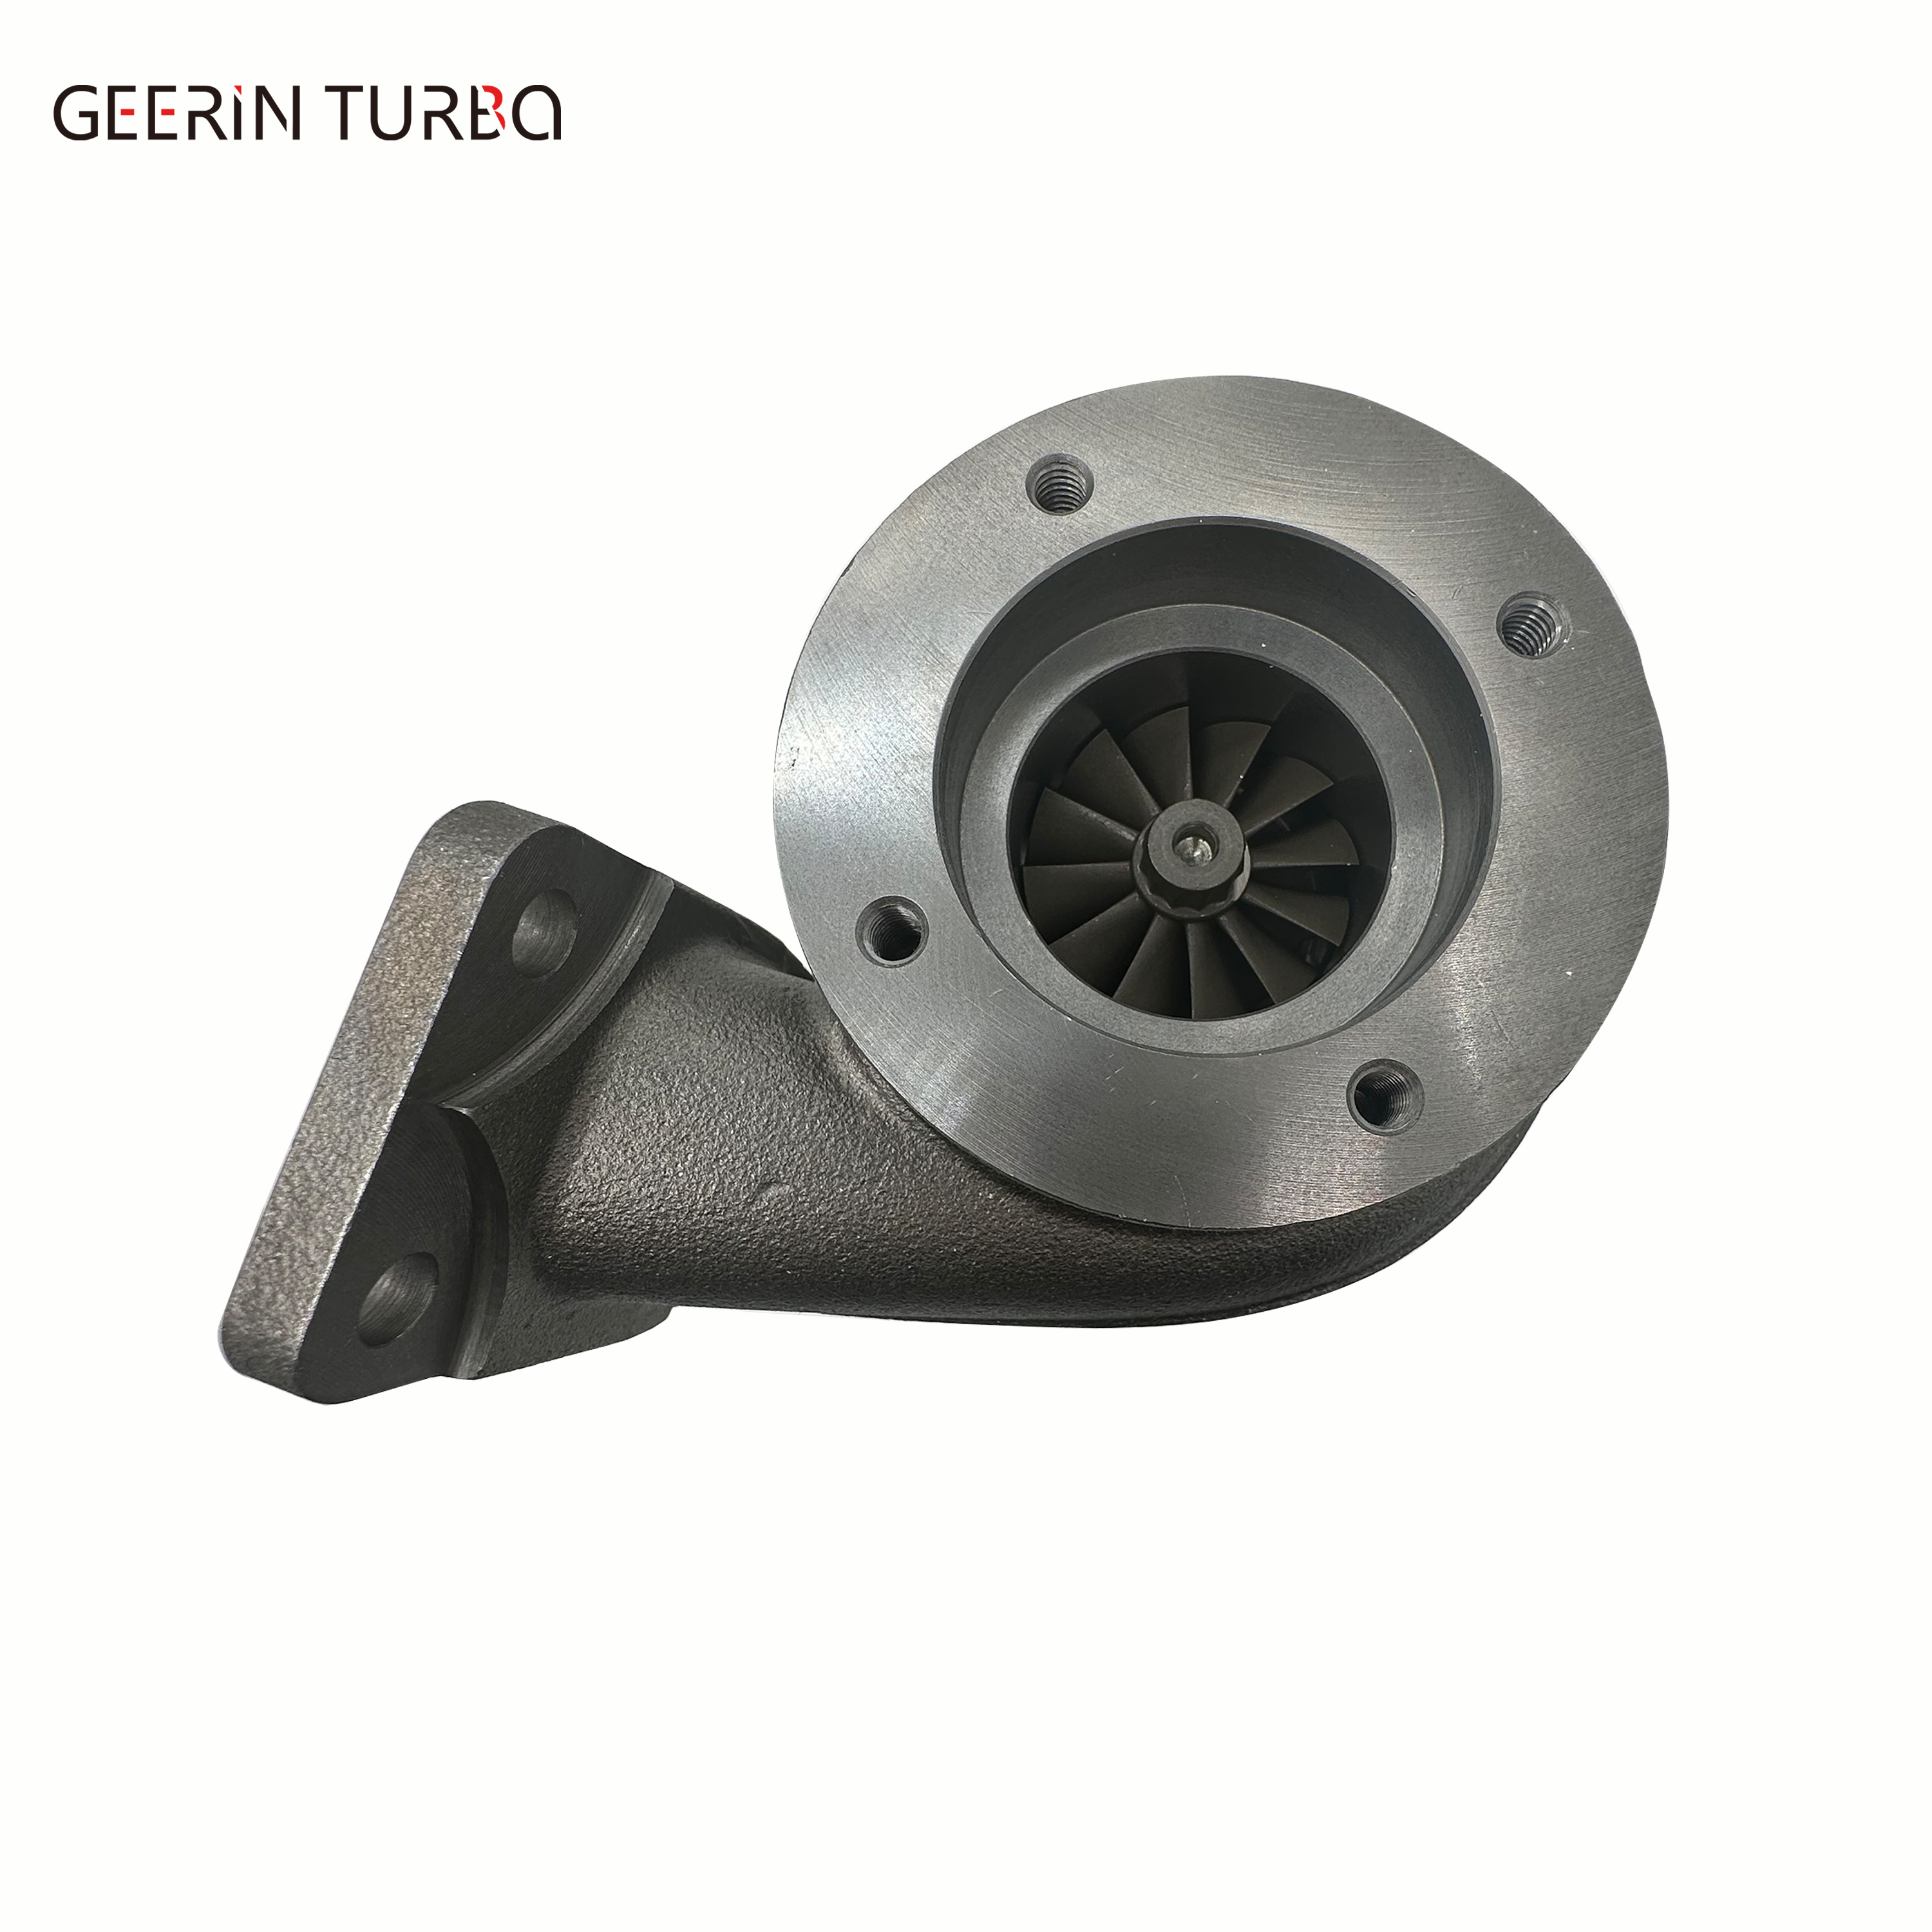 C14 c14-127-01 Turbocharger Kit with D245 Engine Factory